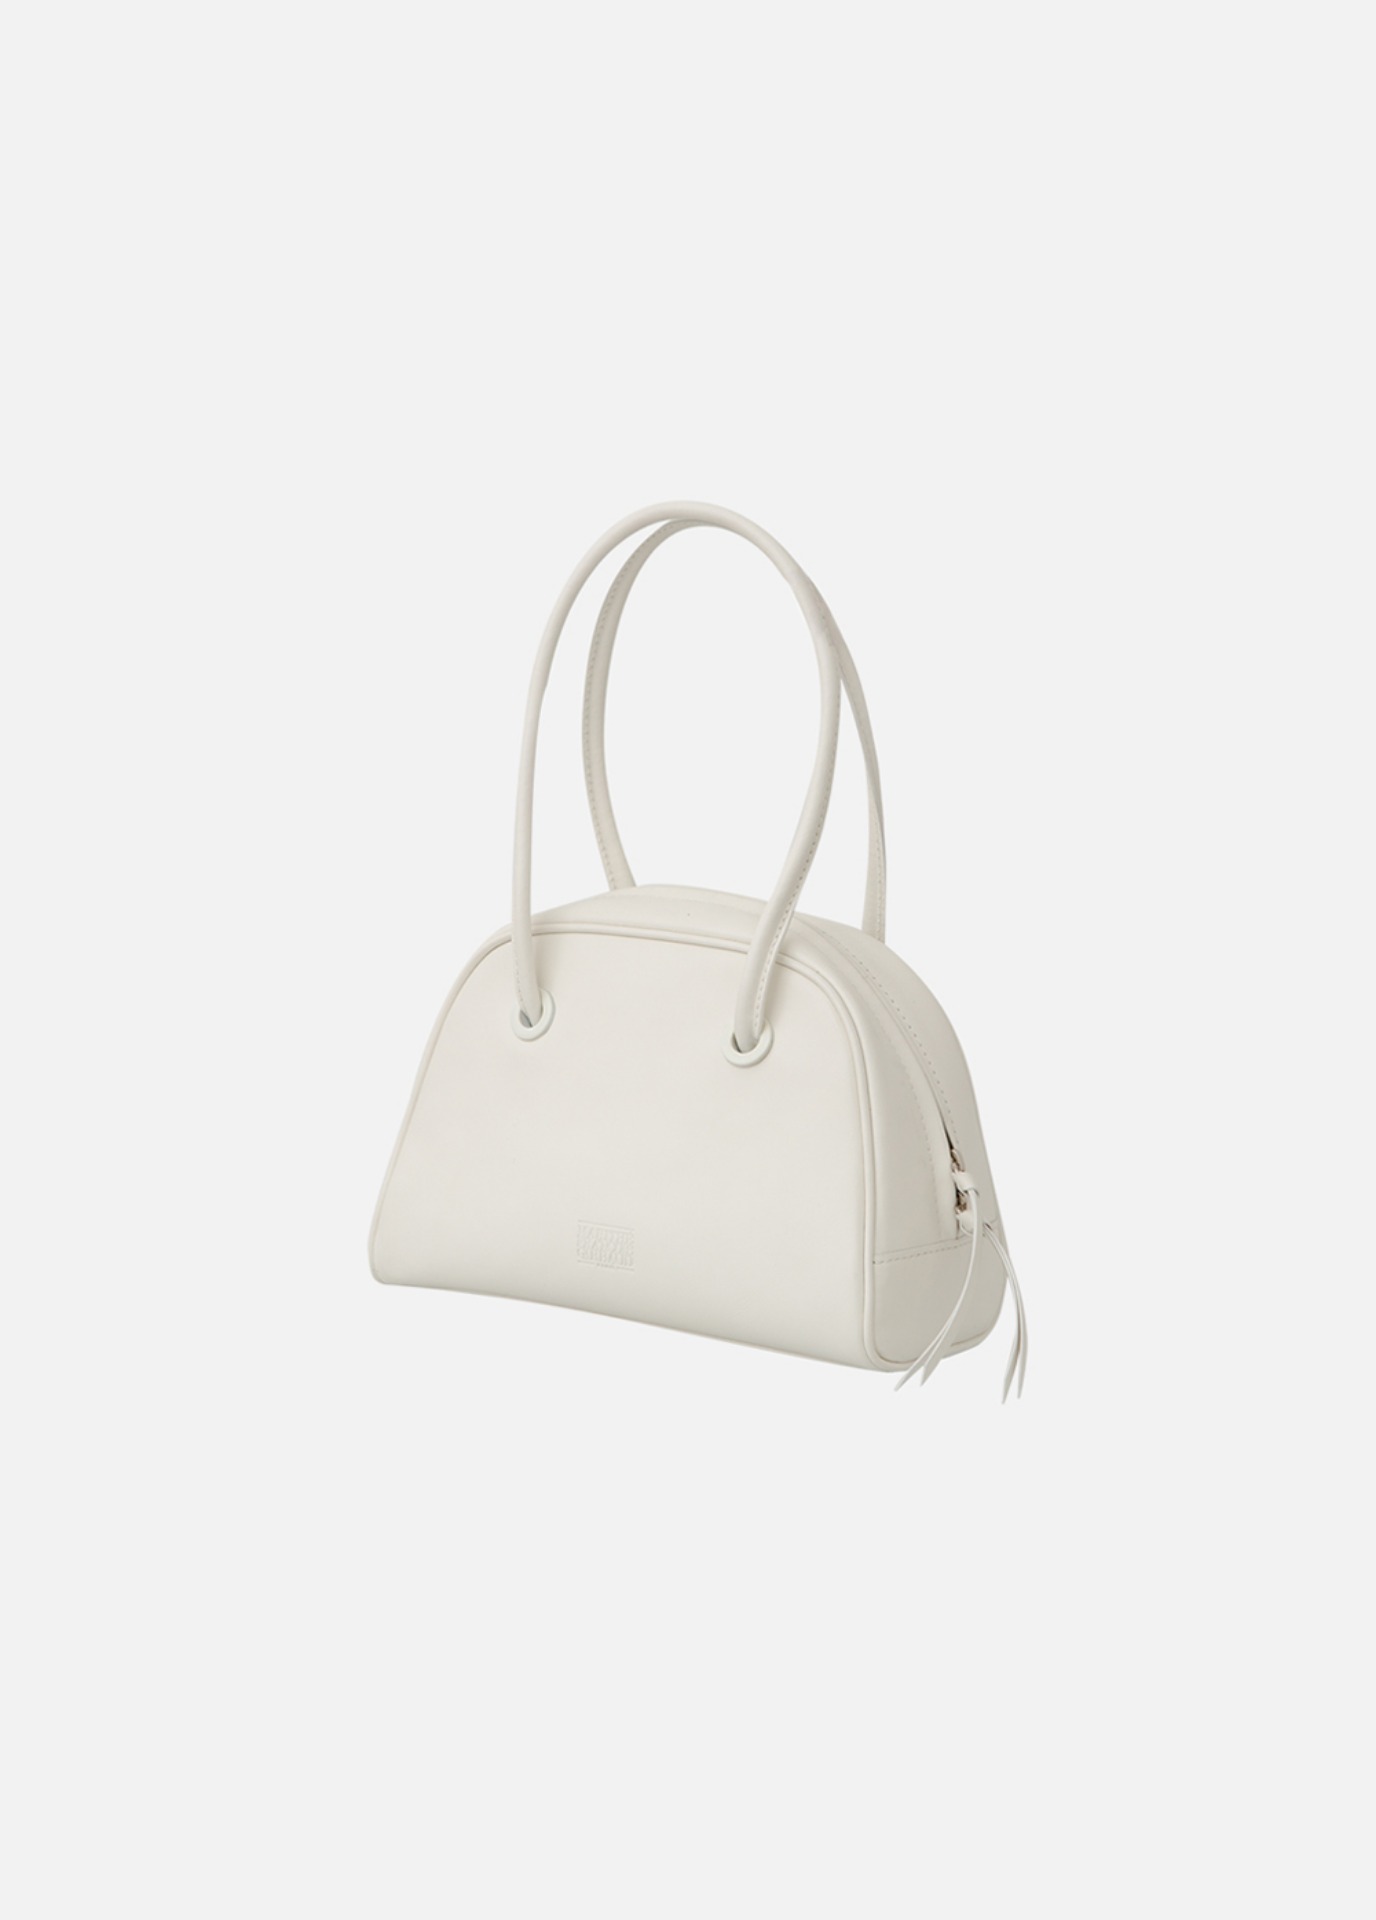 LUNE LEATHER BAG white